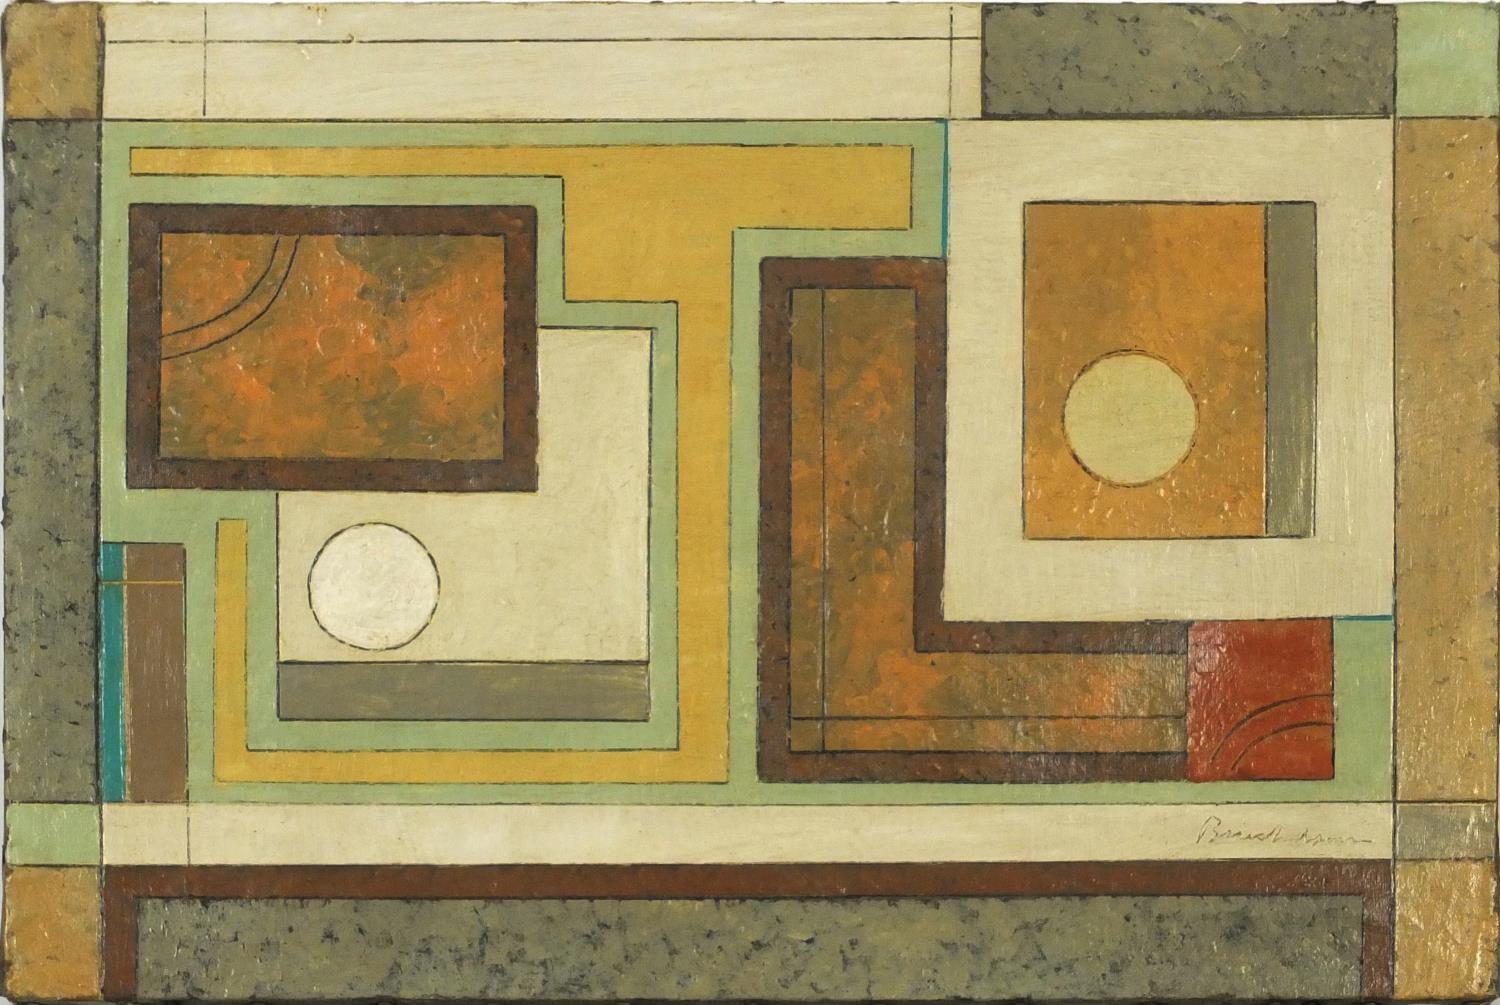 Abstract composition, geometric shapes, oil on canvas, bearing an indistinct signature and